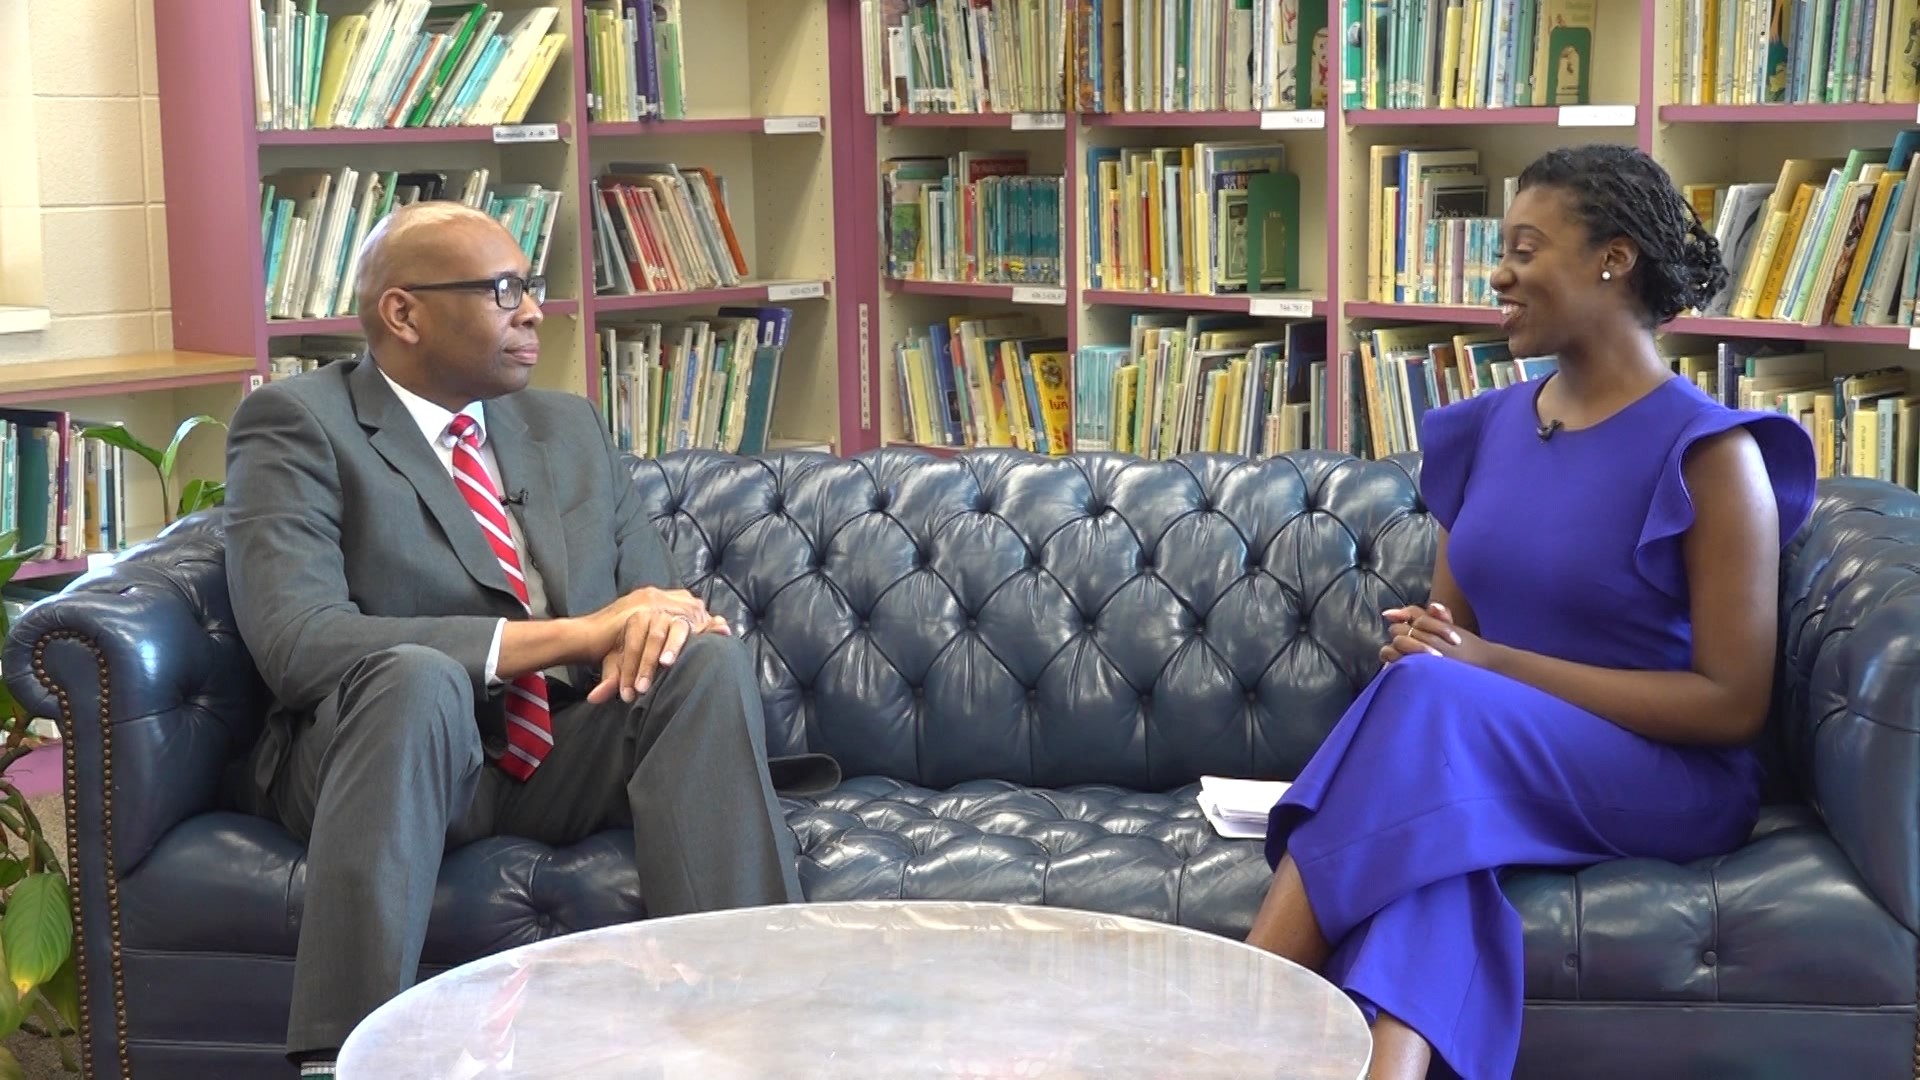 A new era begins at North Alabama's largest school district as a new leader begins his tenure. Dr. Clarence Sutton speaks with FOX54's Keneisha Deas.